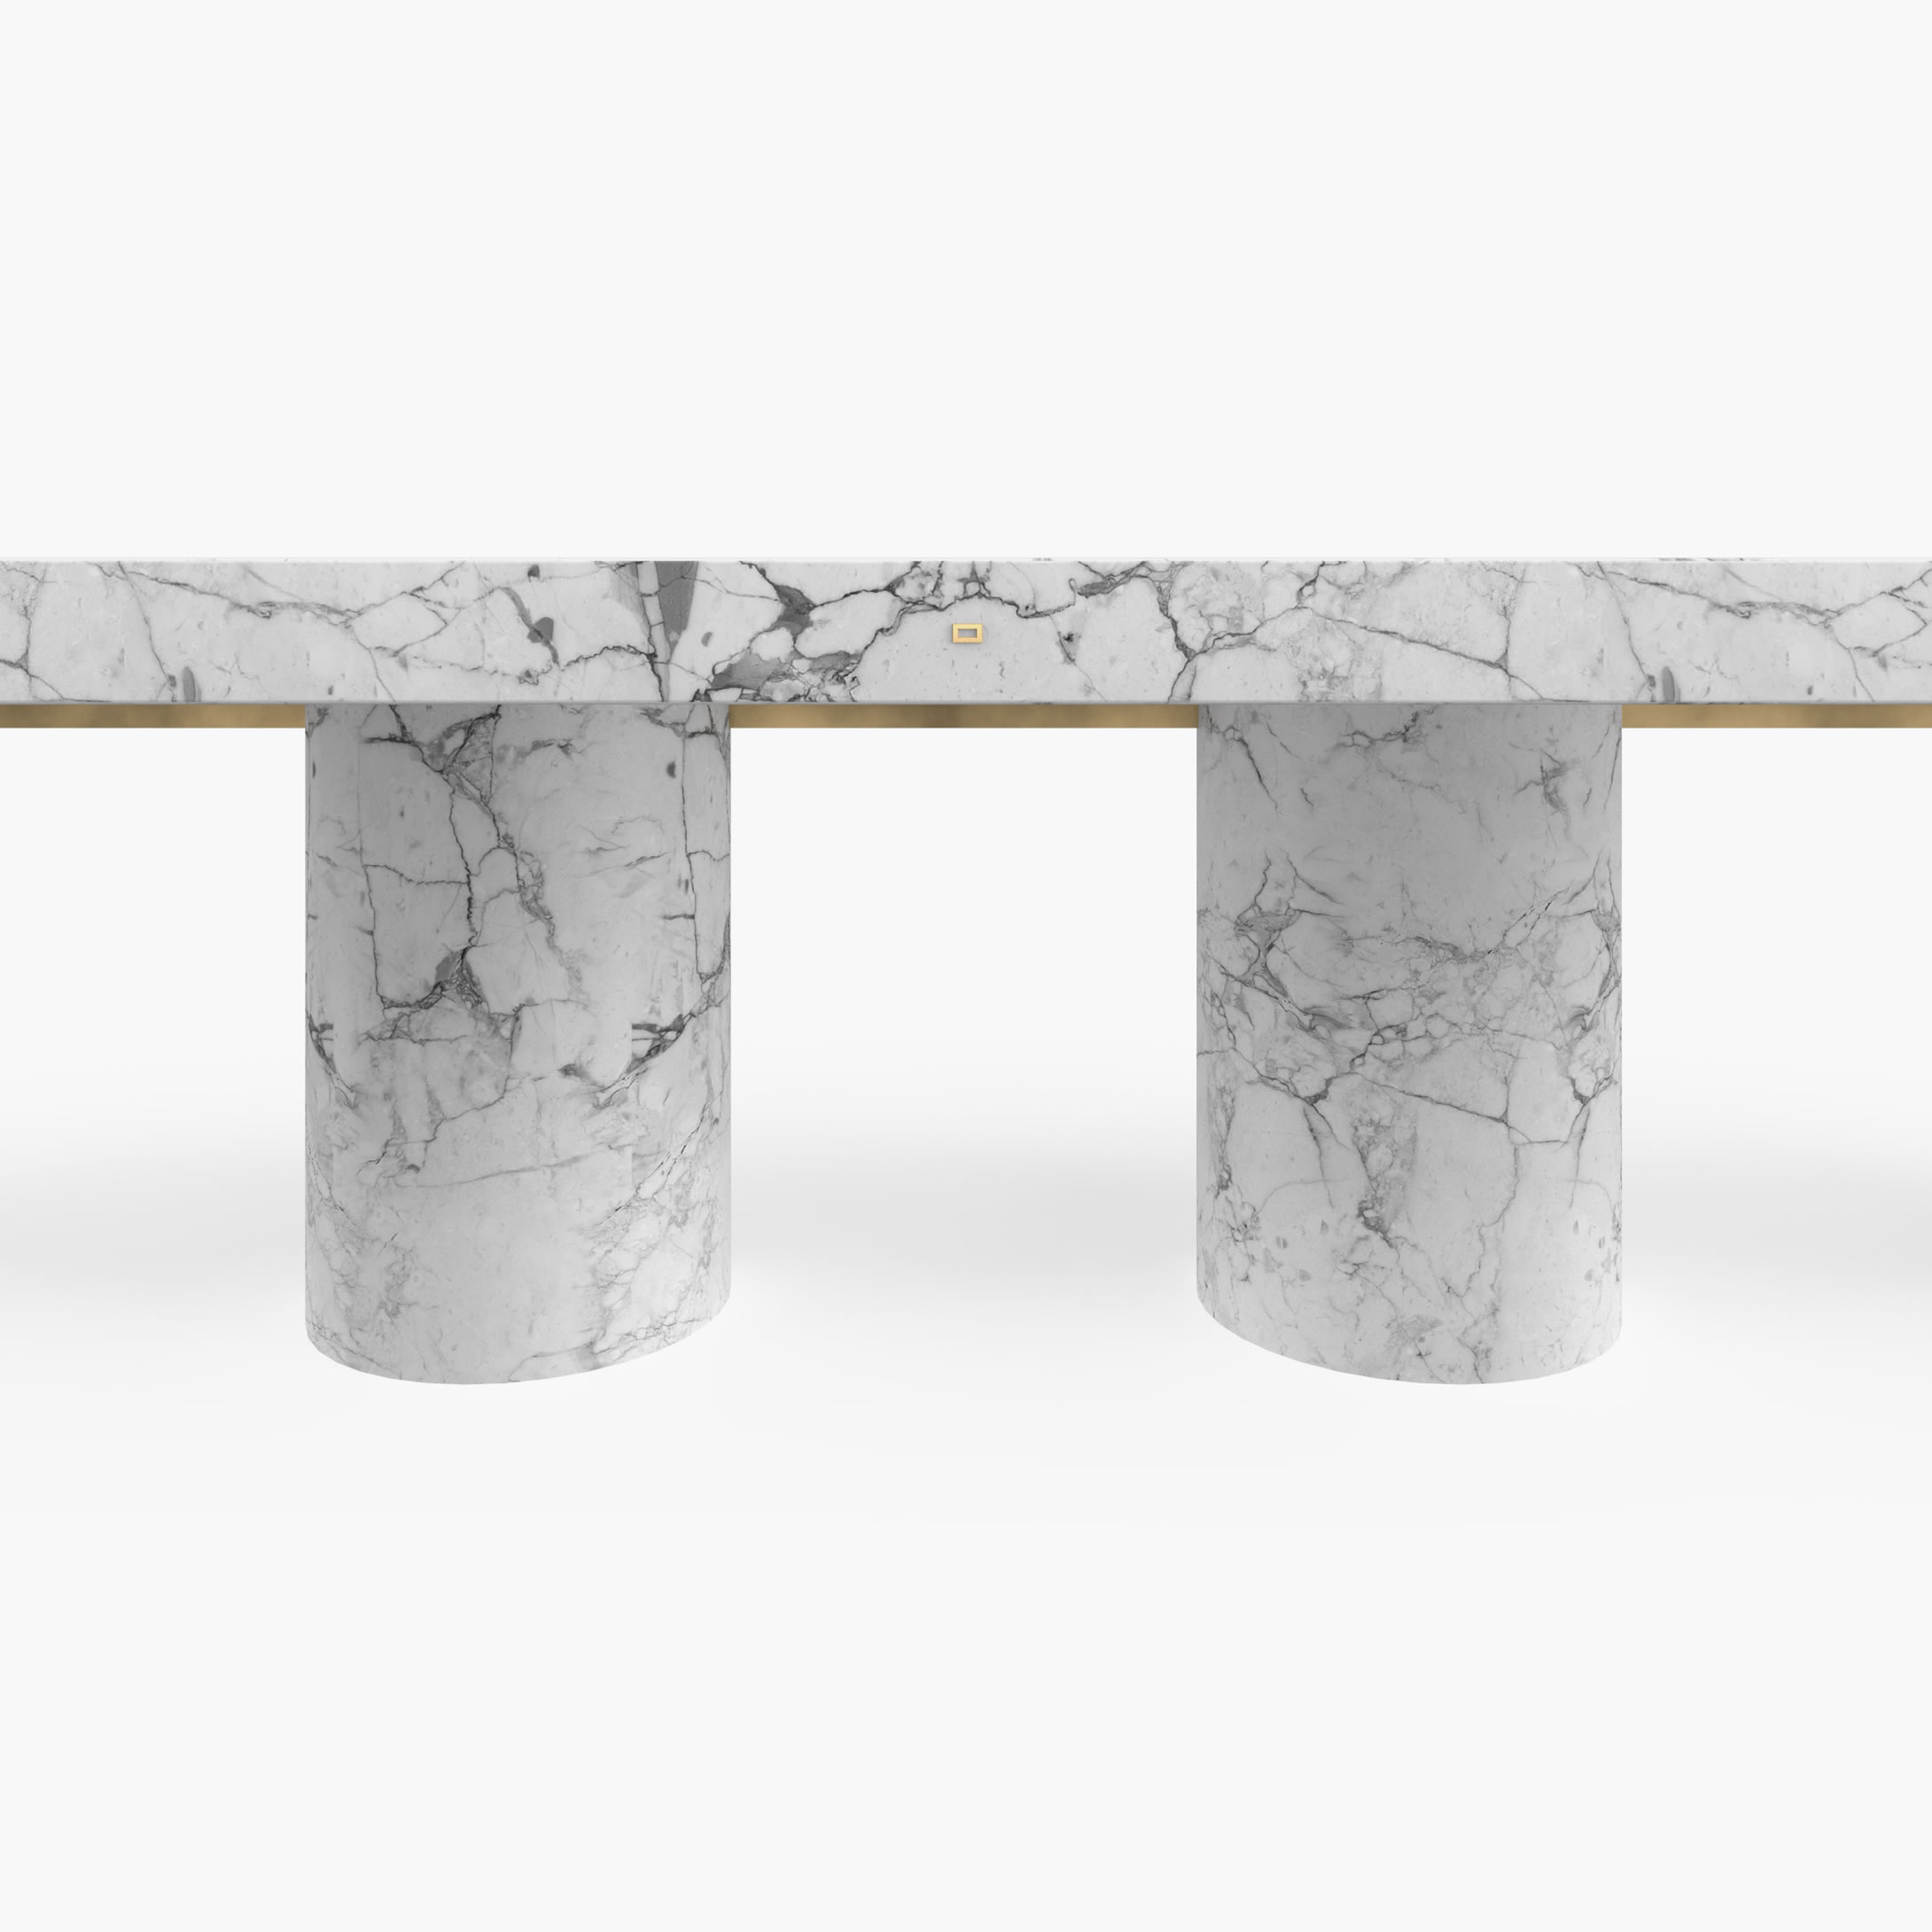 Dining Table very large Cylinder legs White Arabescato Marble minimalist Dining Room Luxury Dining Tables FS 180 FELIX SCHWAKE